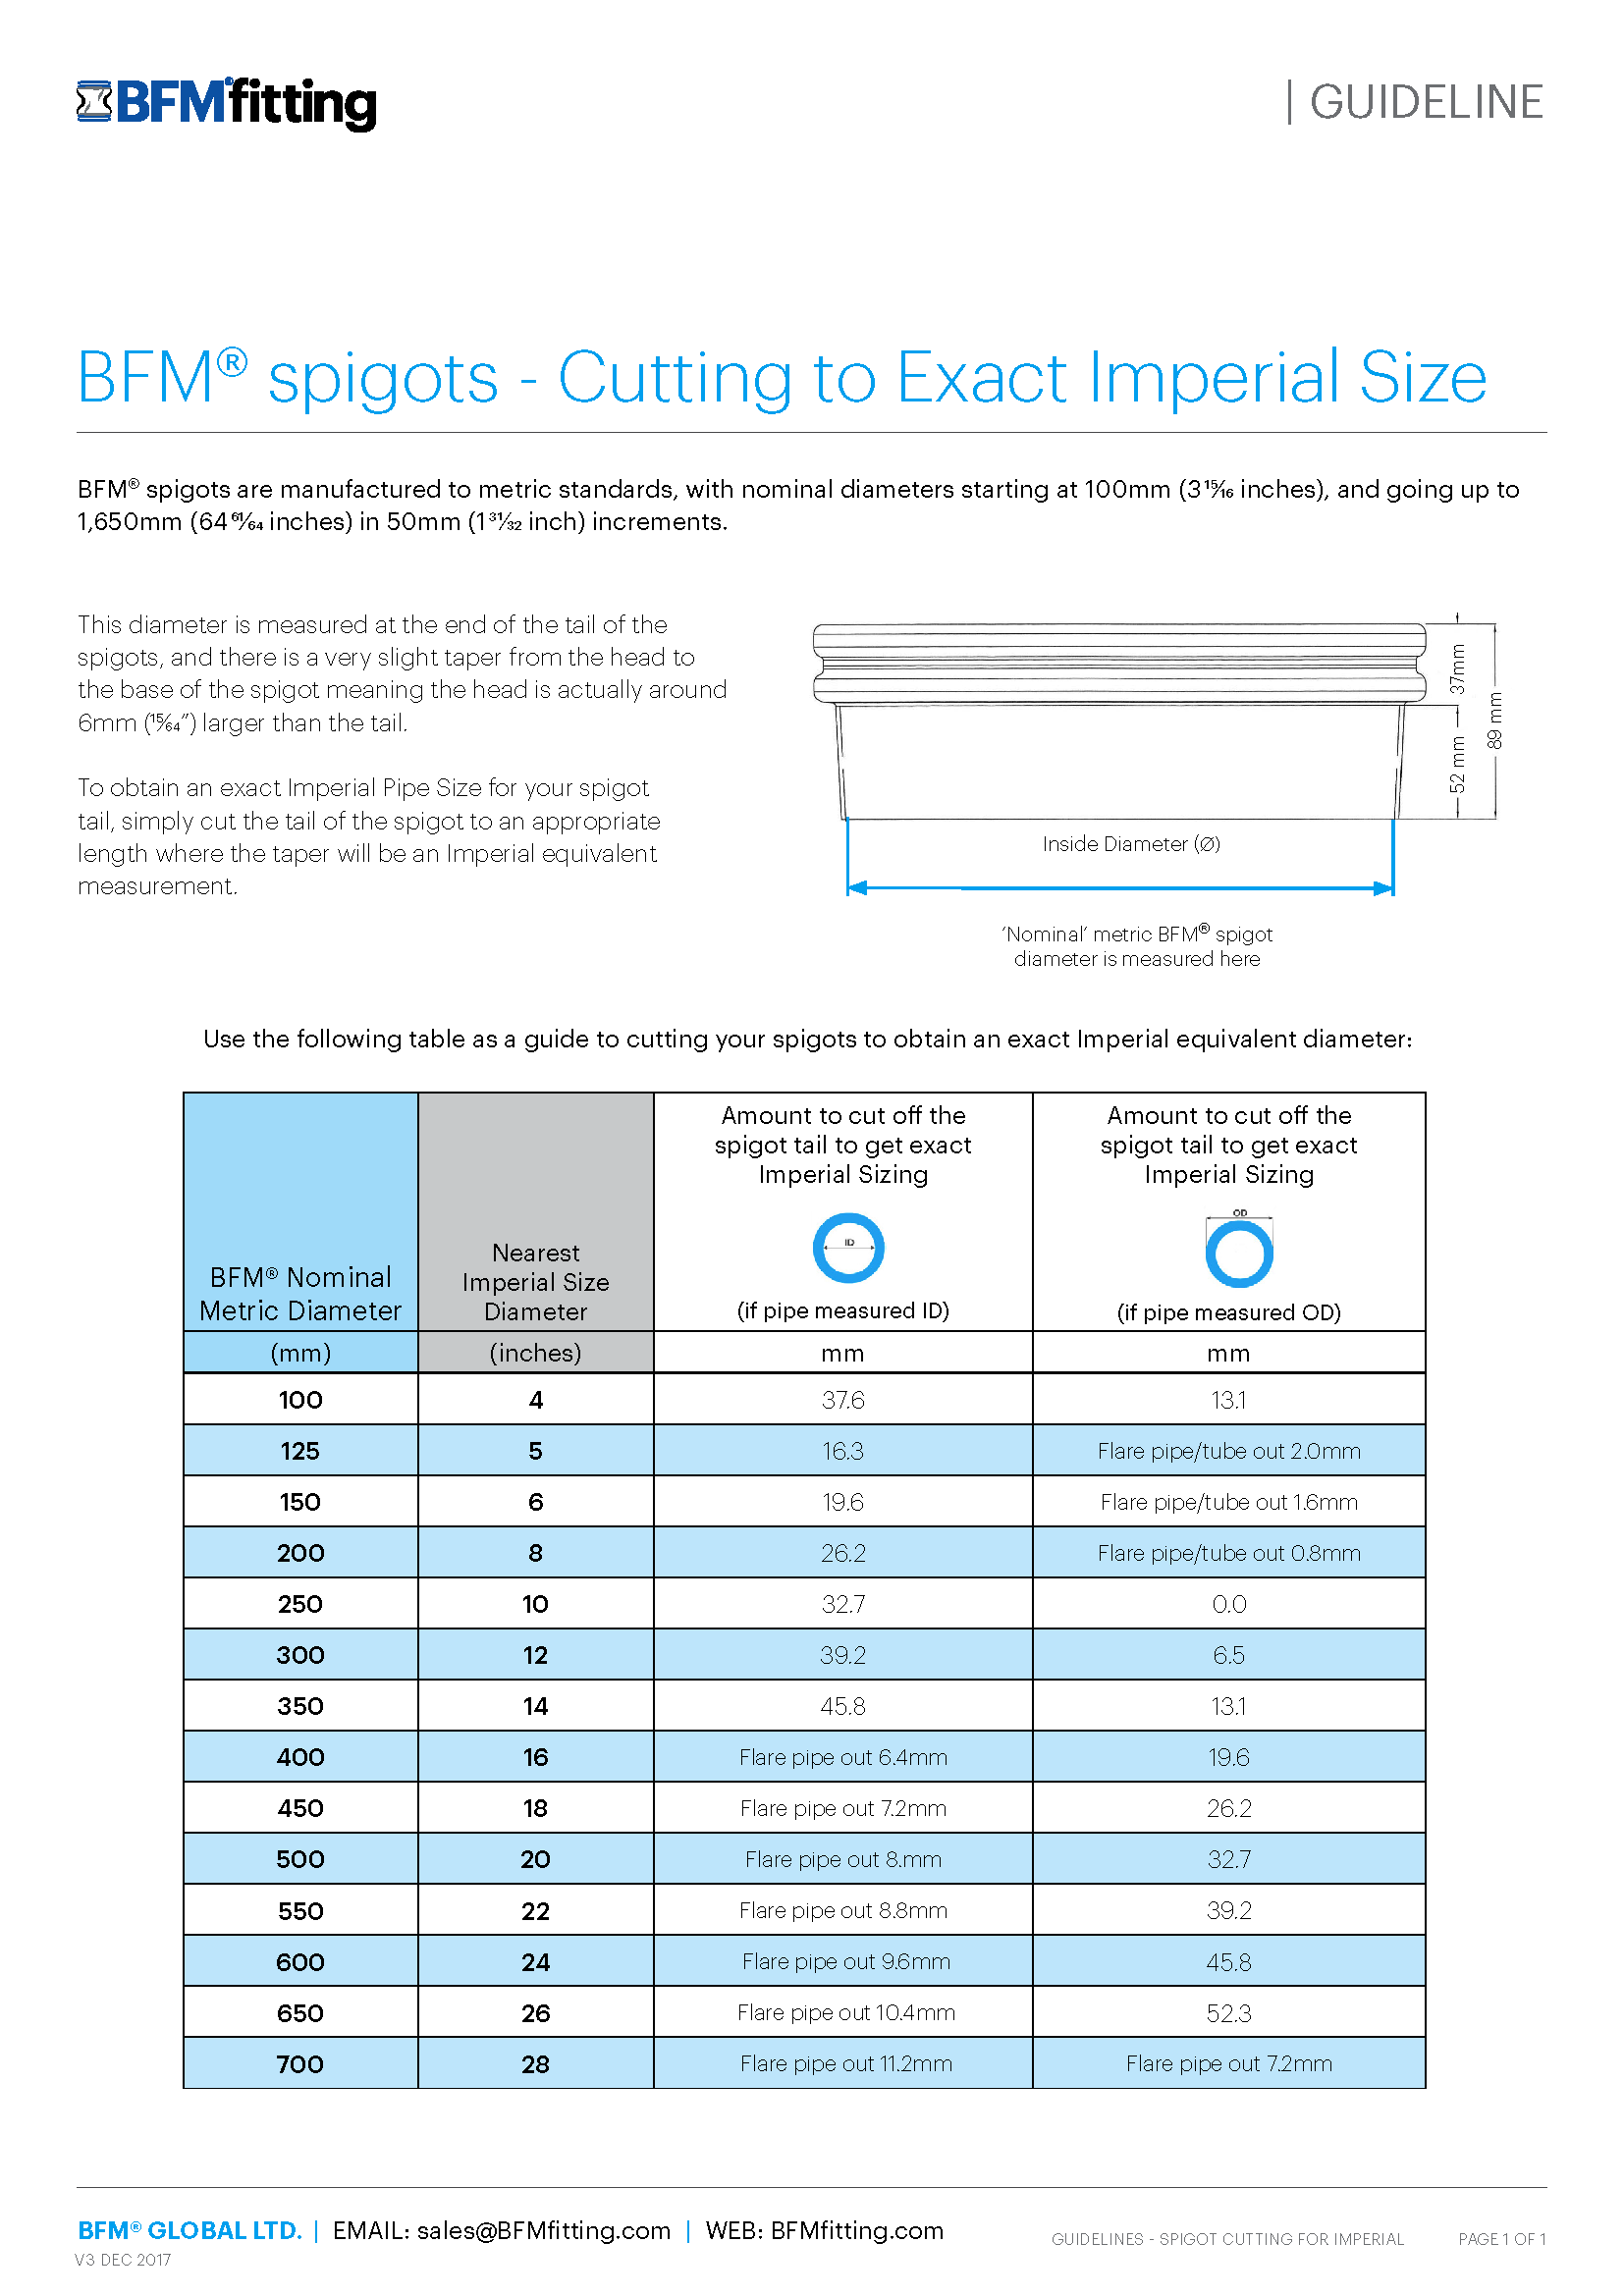 BFM-Fitting-Cutting-Spigots-to-Exact-Imperial-Size-Cover